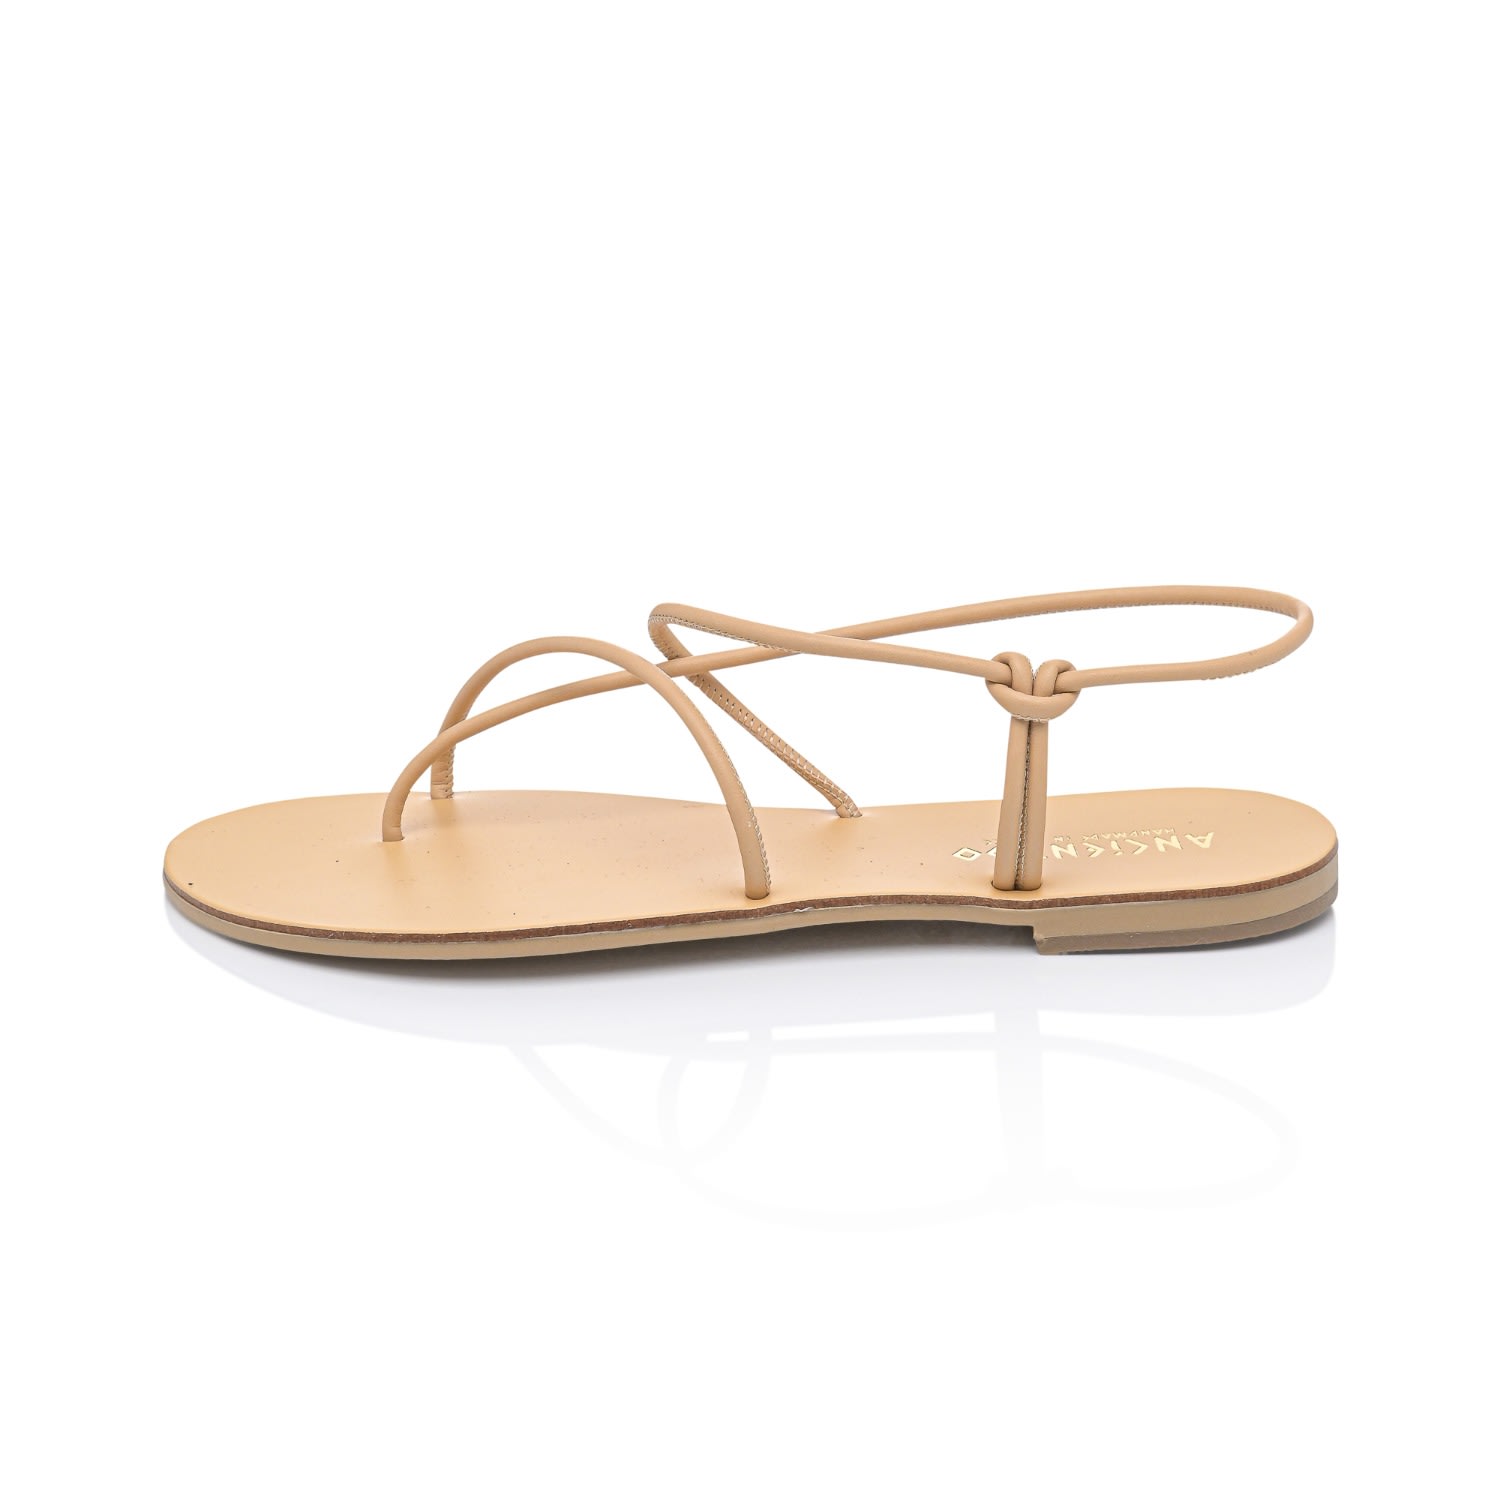 Neutrals Iaso Cord Nude Handcrafted Women’s Leather Sandals With A Lasso Style Strap 3 Uk Ancientoo